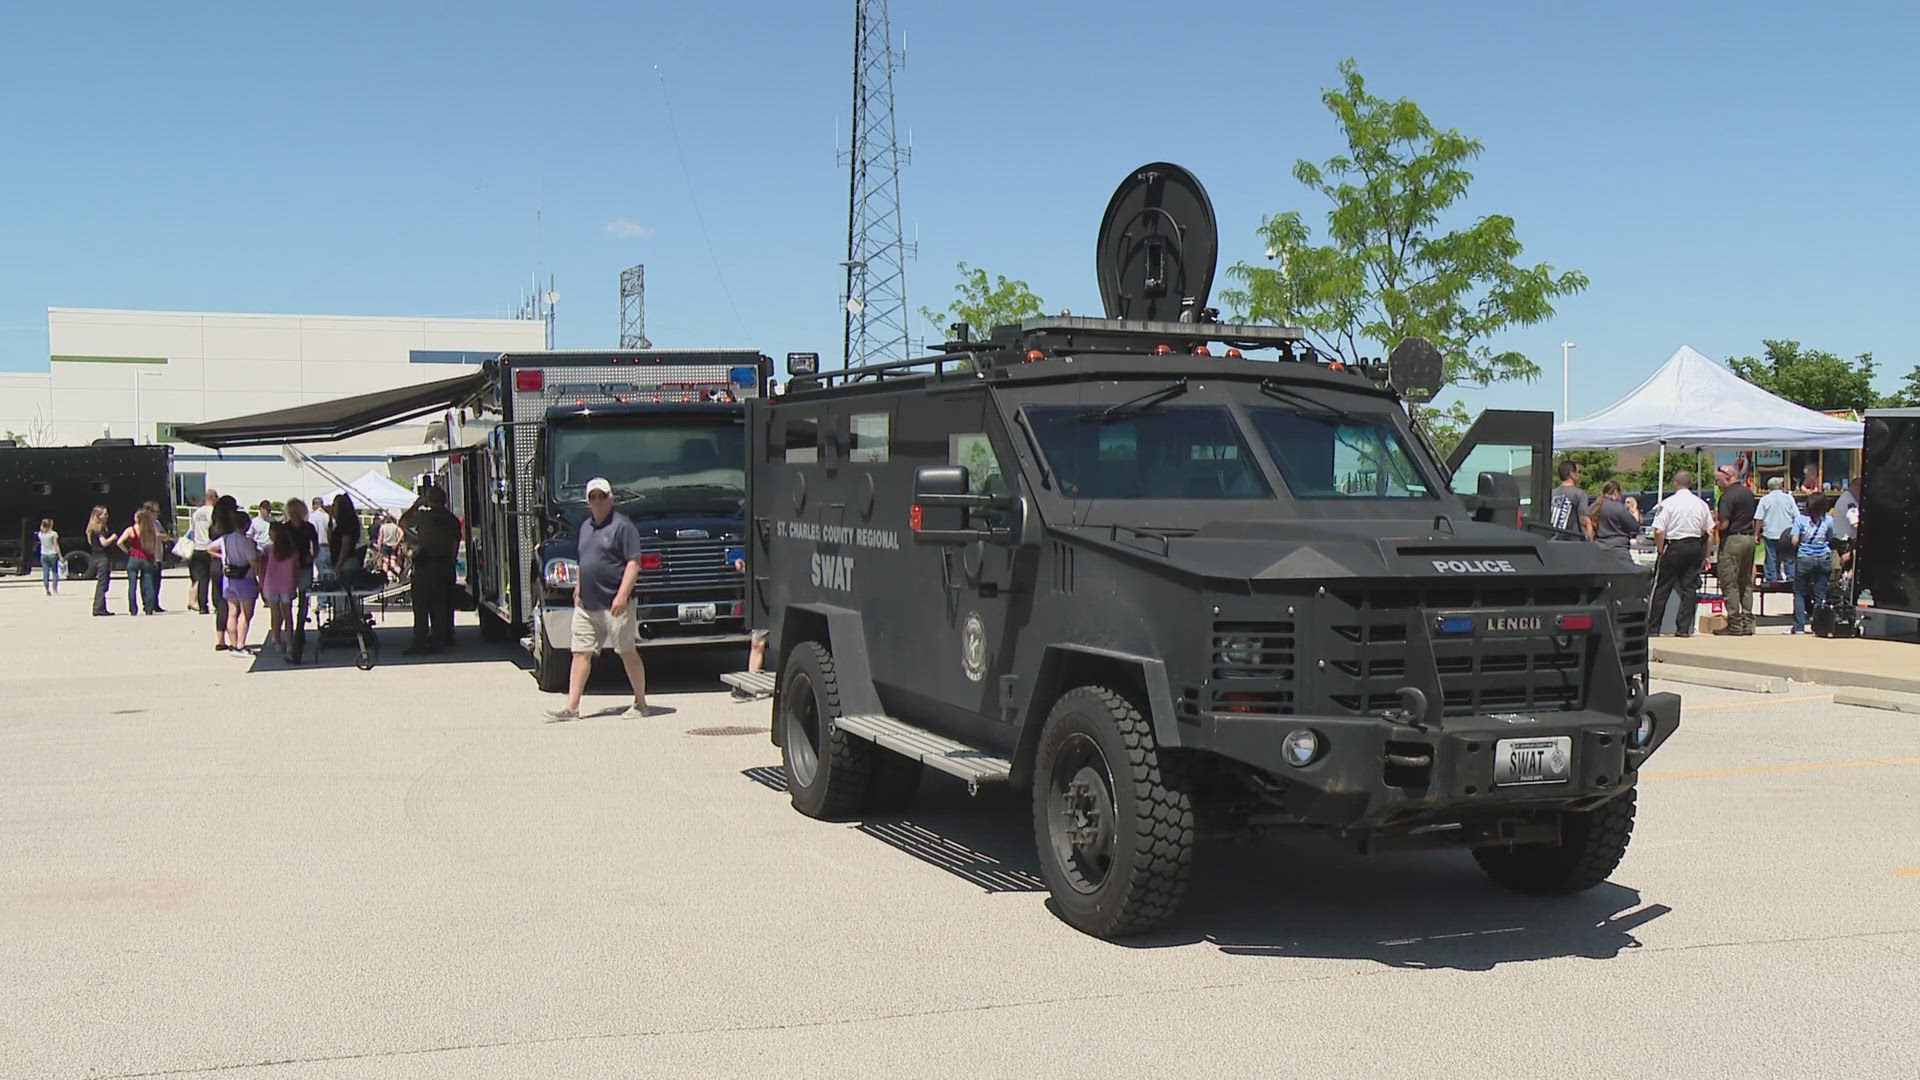 Cpl. Barry Bayles tells KSDK the open house is one of the police department's biggest events, where people can get to know the public servants and what they do.